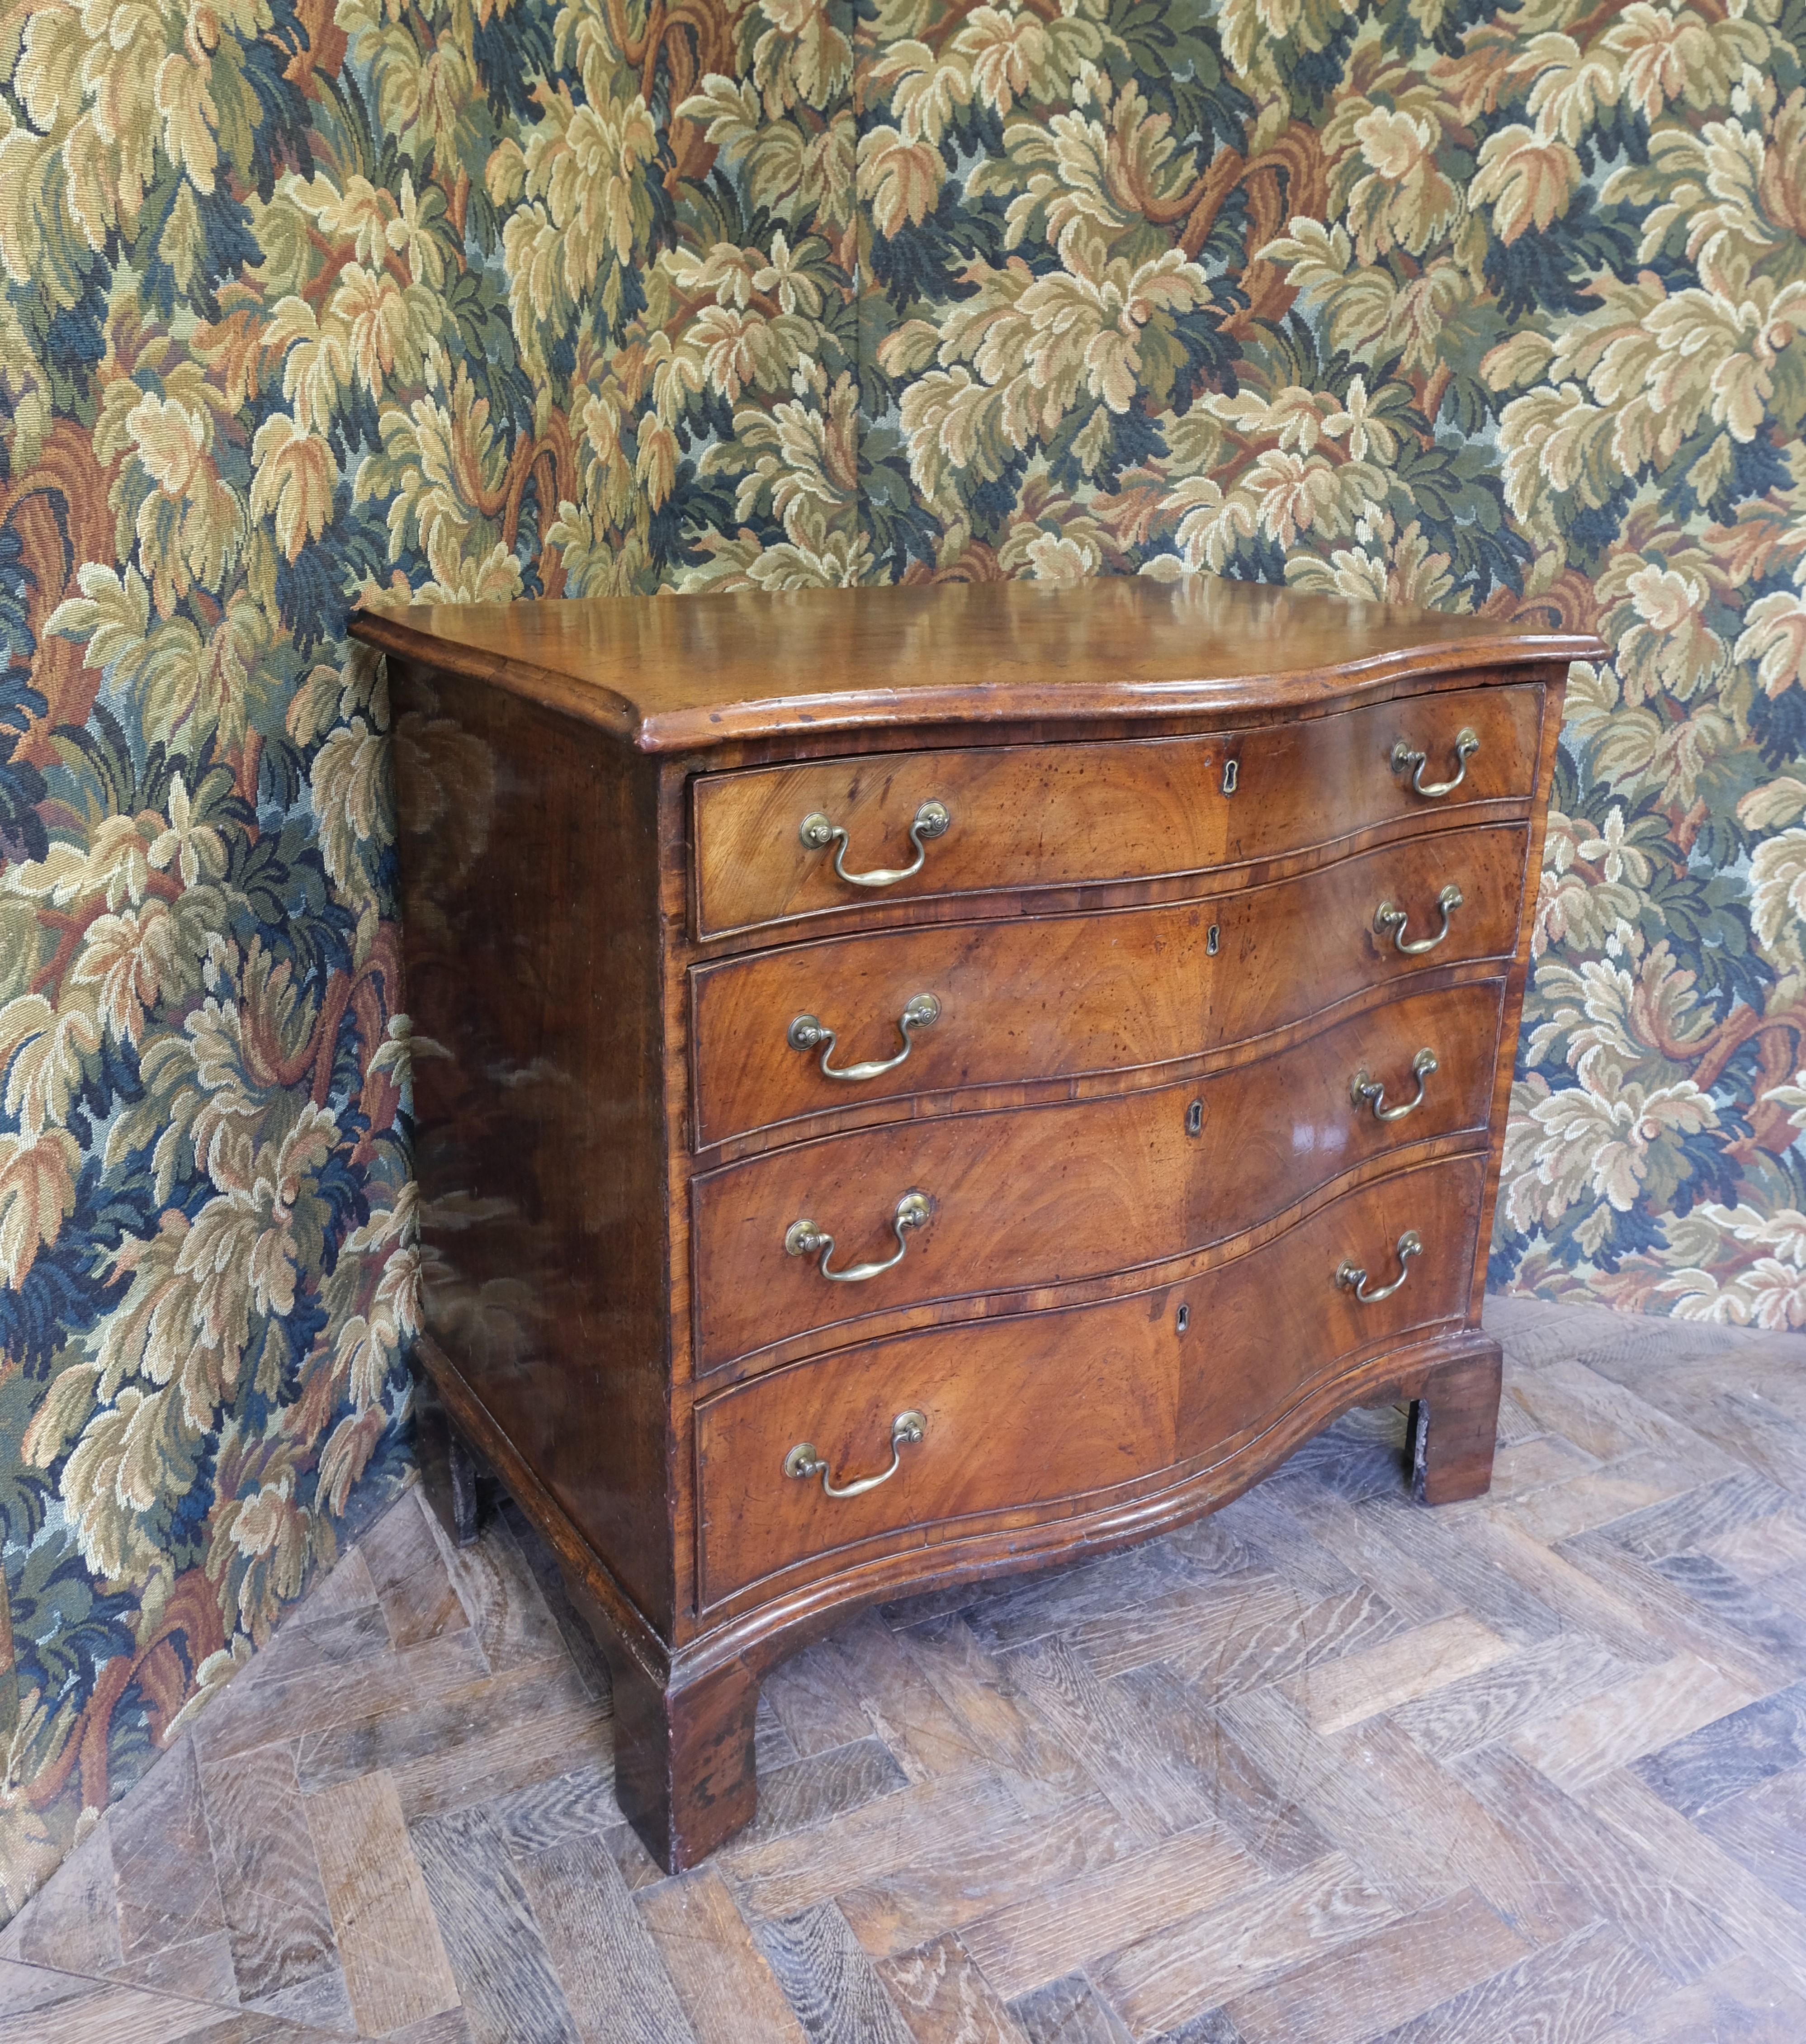 Hutton-Clarke Antiques proudly offers a stunning Georgian Serpentine chest of drawers, a masterpiece of the Georgian era. This piece features a striking serpentine front with book-matched mahogany flame veneers, elegantly standing on original